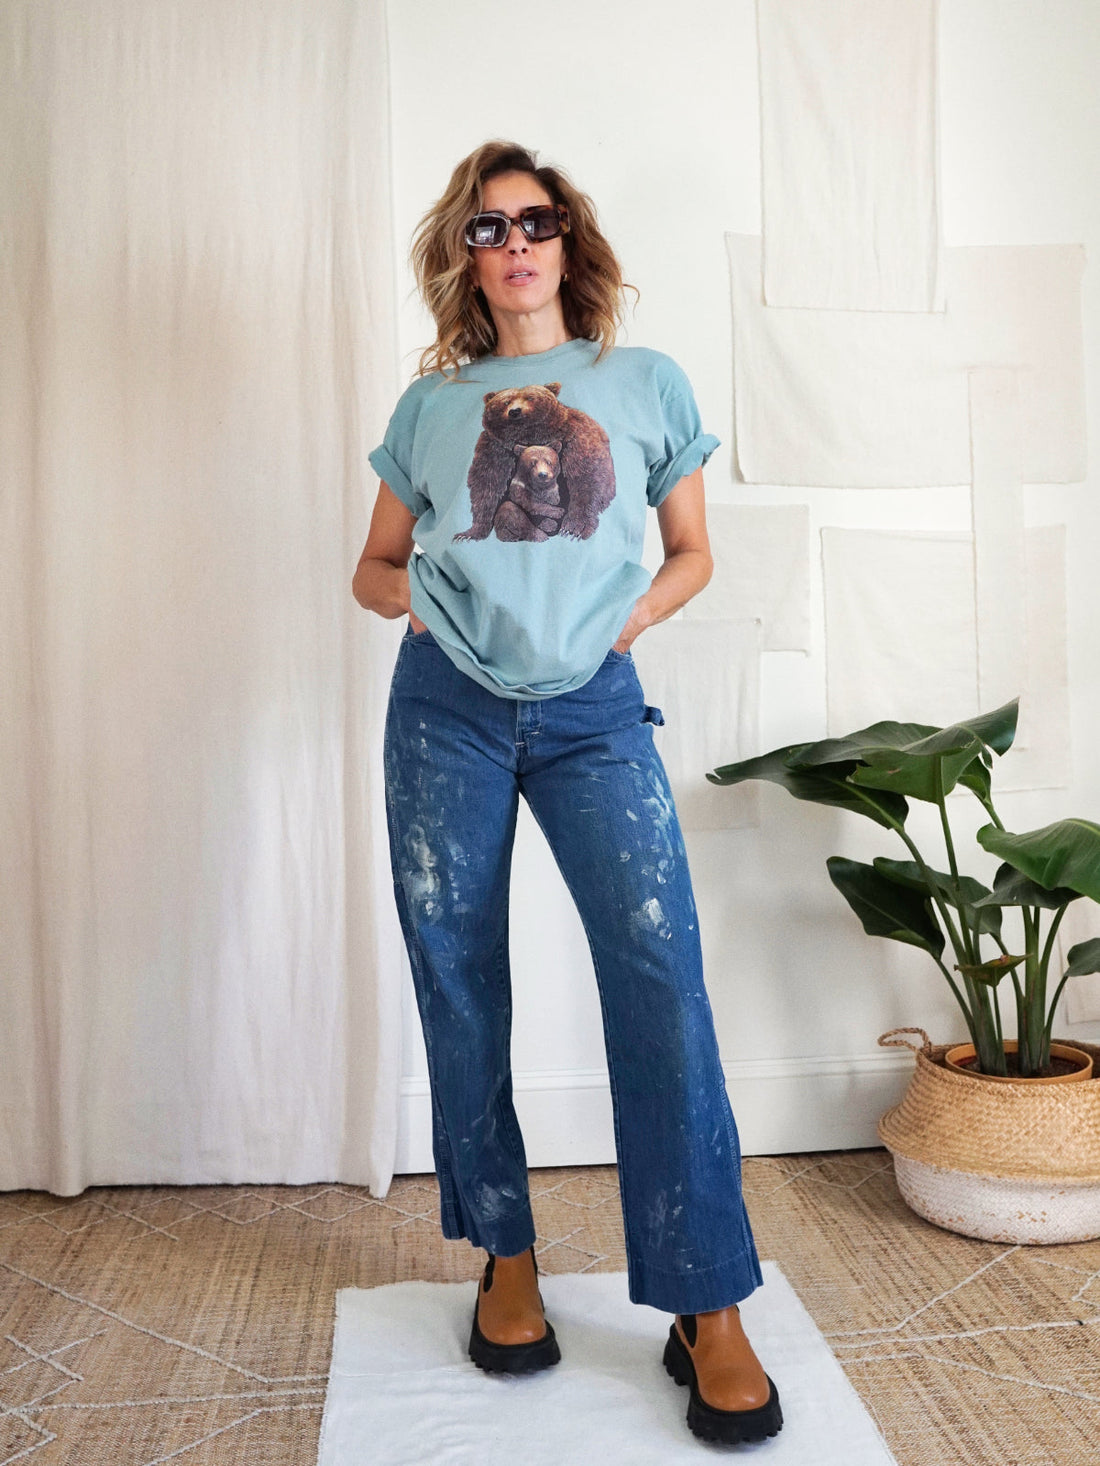 Vintage Grizzly Bear Tee-closiTherapi | vinTage